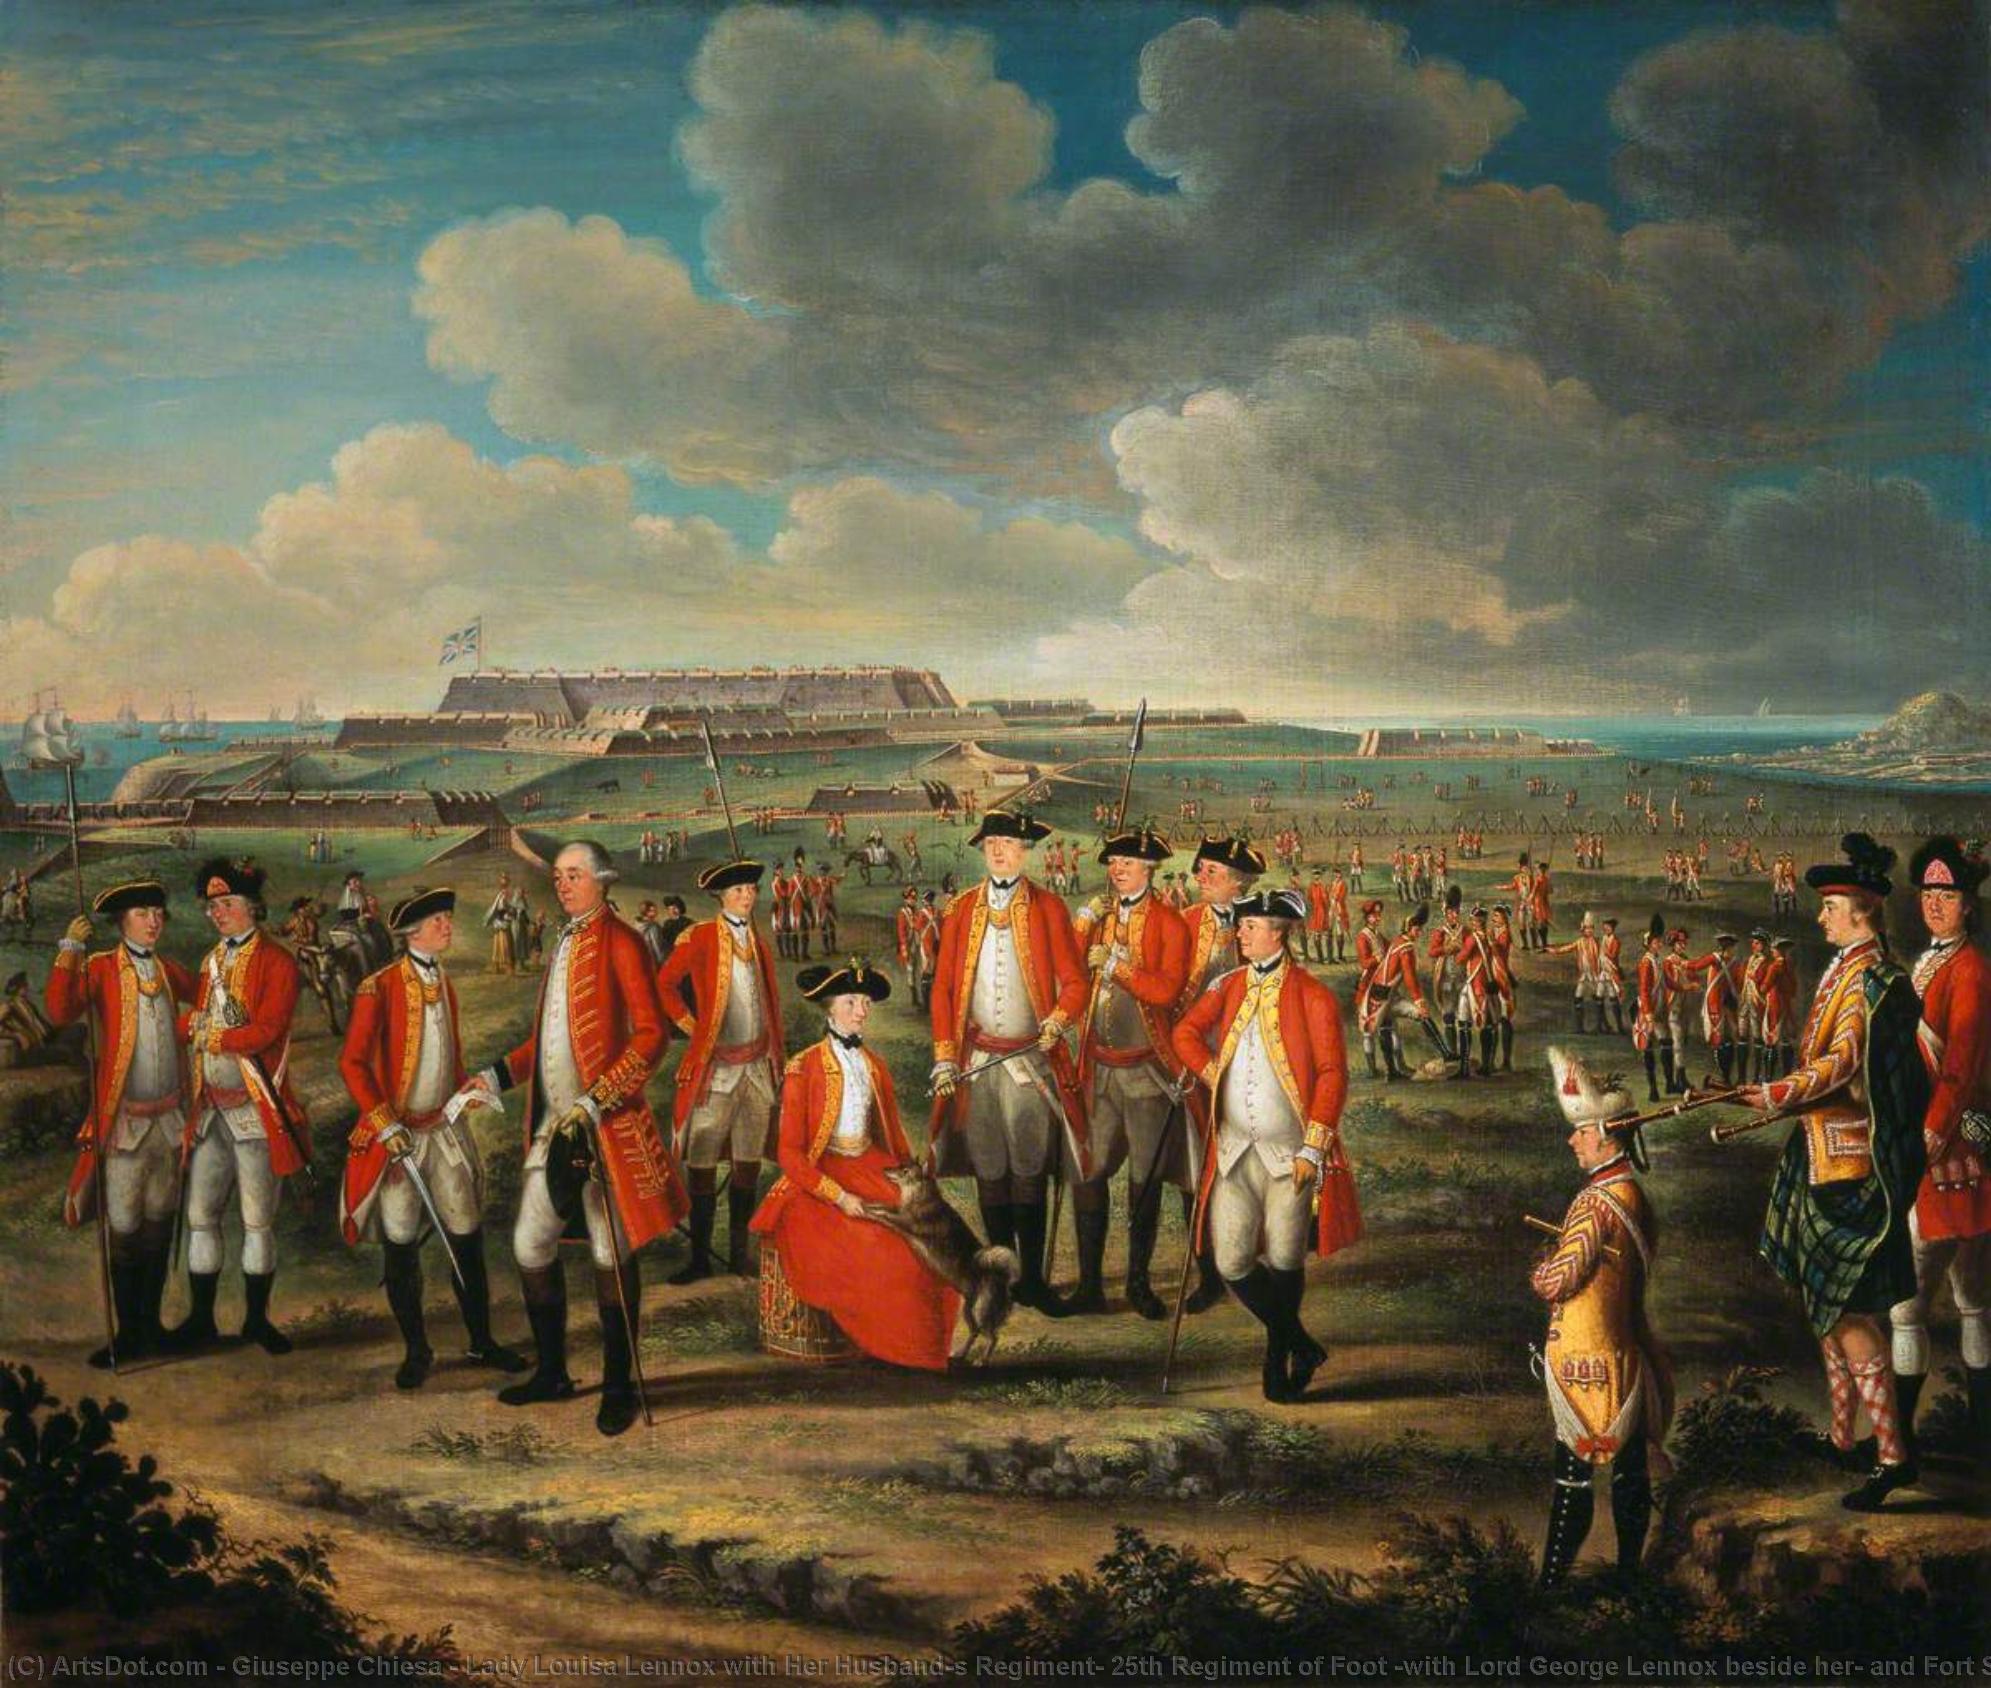 Lady Louisa Lennox with Her Husband’s Regiment, 25th Regiment of Foot (with Lord George Lennox beside her, and Fort St Philip, Port Mahon, in the background), 1771 by Giuseppe Chiesa Giuseppe Chiesa | ArtsDot.com